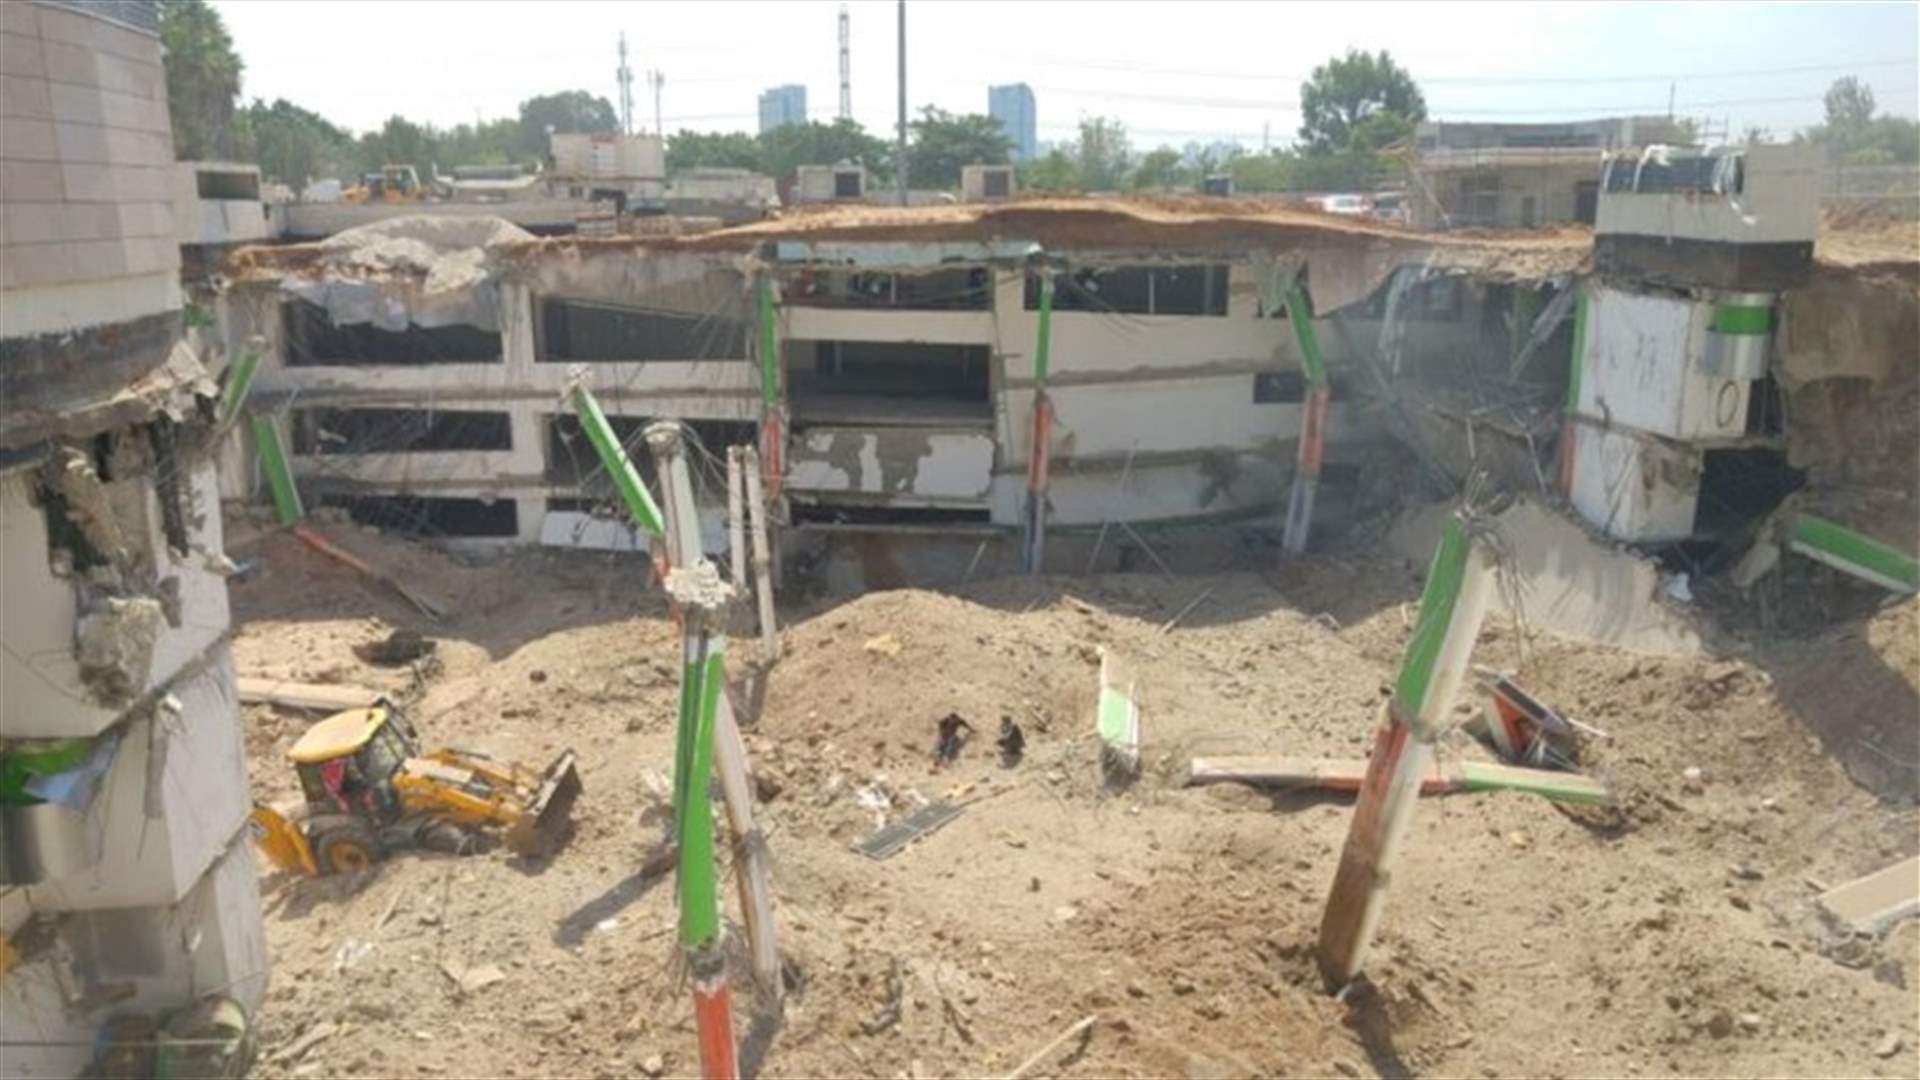 At least two dead in Israeli building site collapse - rescue services